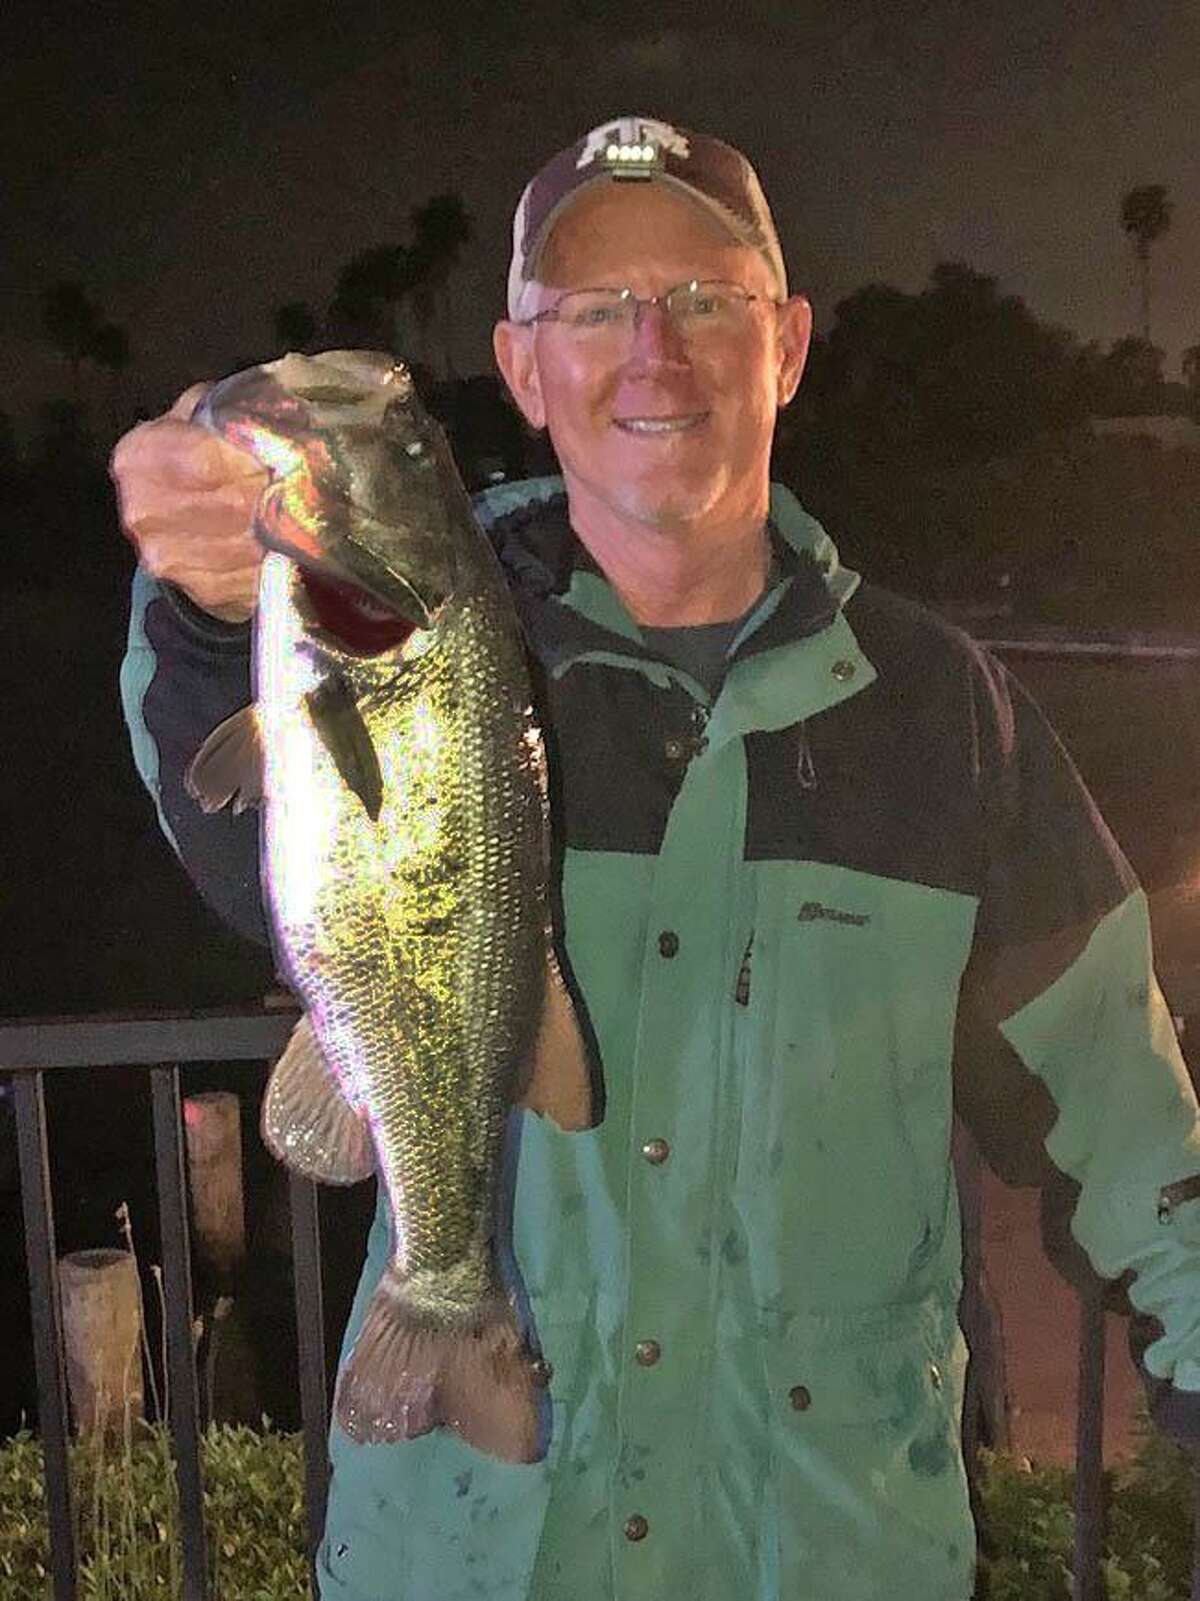 David Perciful came in fourth place in the the CONROEBASS Thursday Big Bass Tournament with a bass weighing 4.18 pounds.